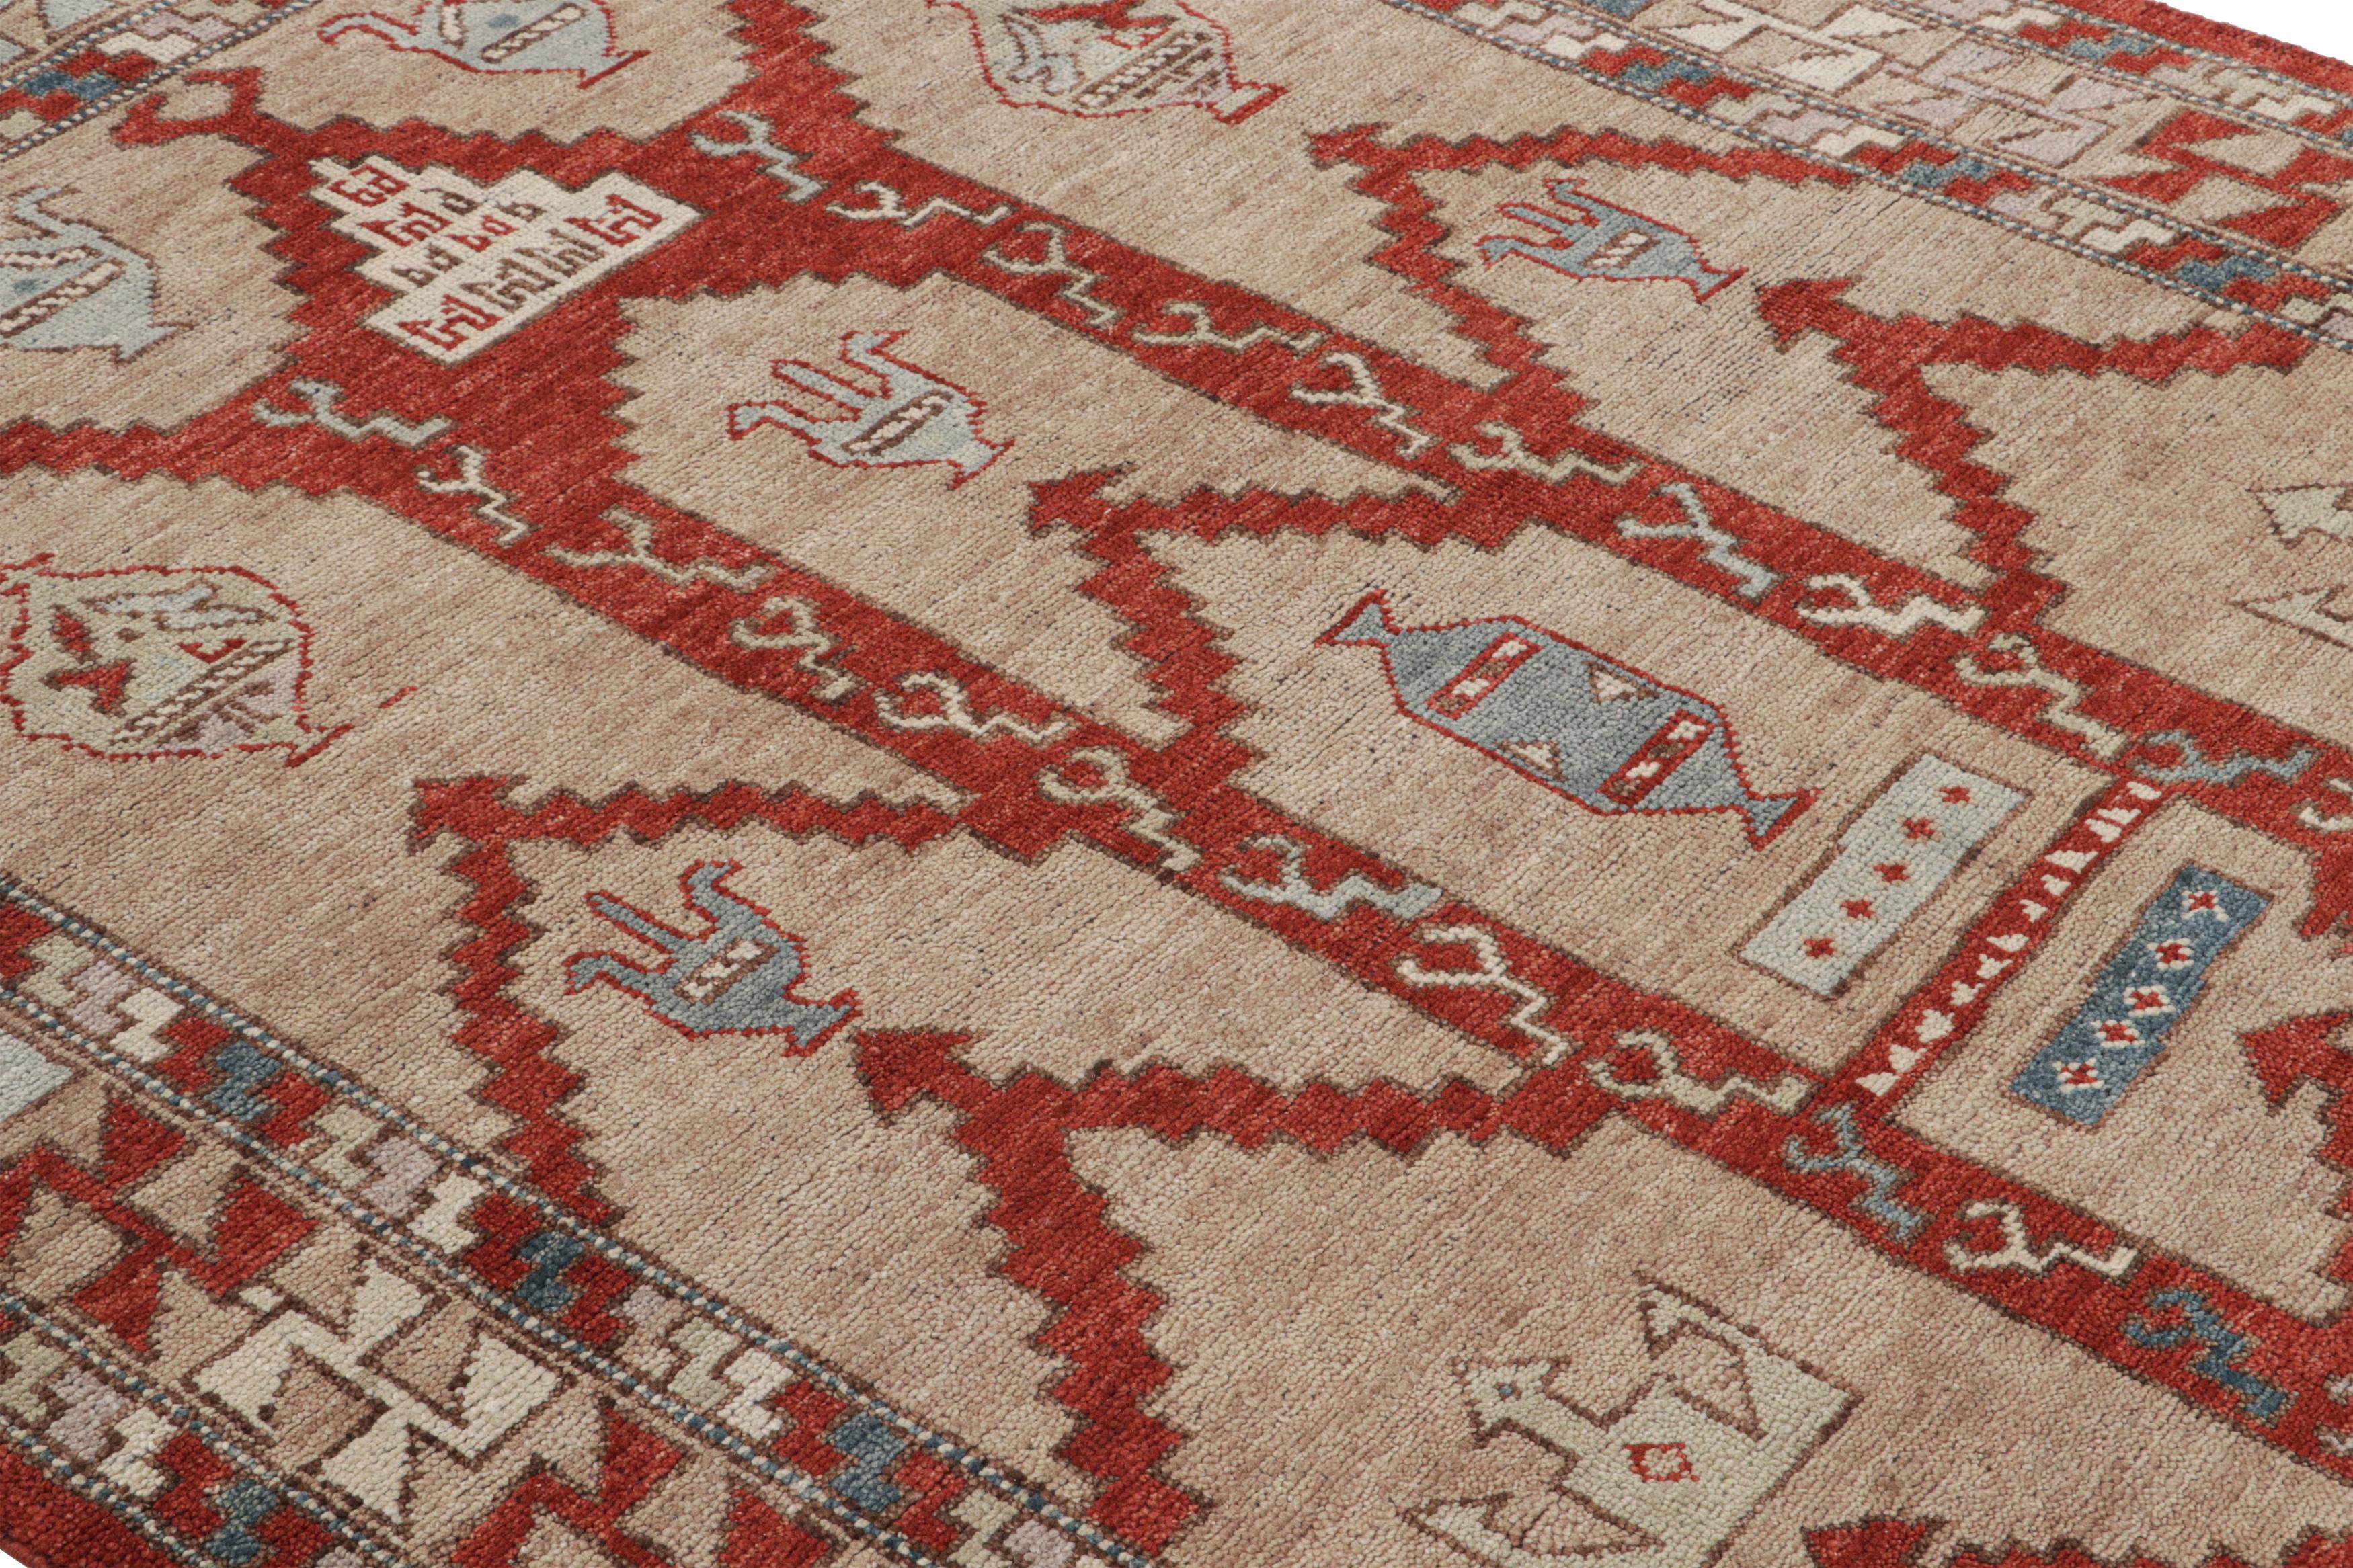 A 6x8 ode to celebrated classic rug styles, from Rug & Kilim’s Burano Collection. Hand knotted in wool, enjoying unique tribal motifs in a warm-and-cool play of red, beige, and soft blue accents. Exceptional in its marriage of inviting movement,